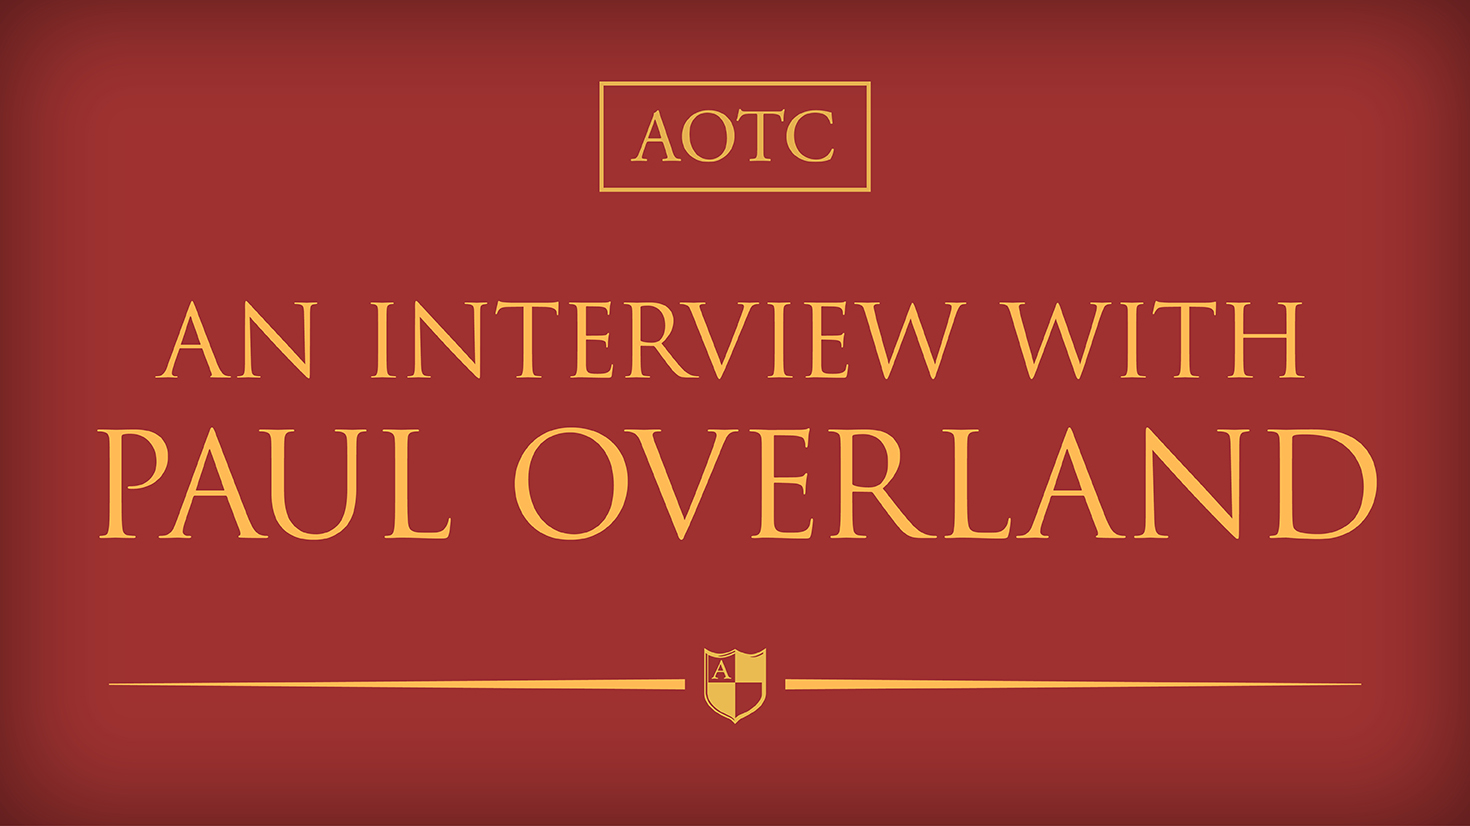 An Interview with Paul Overland